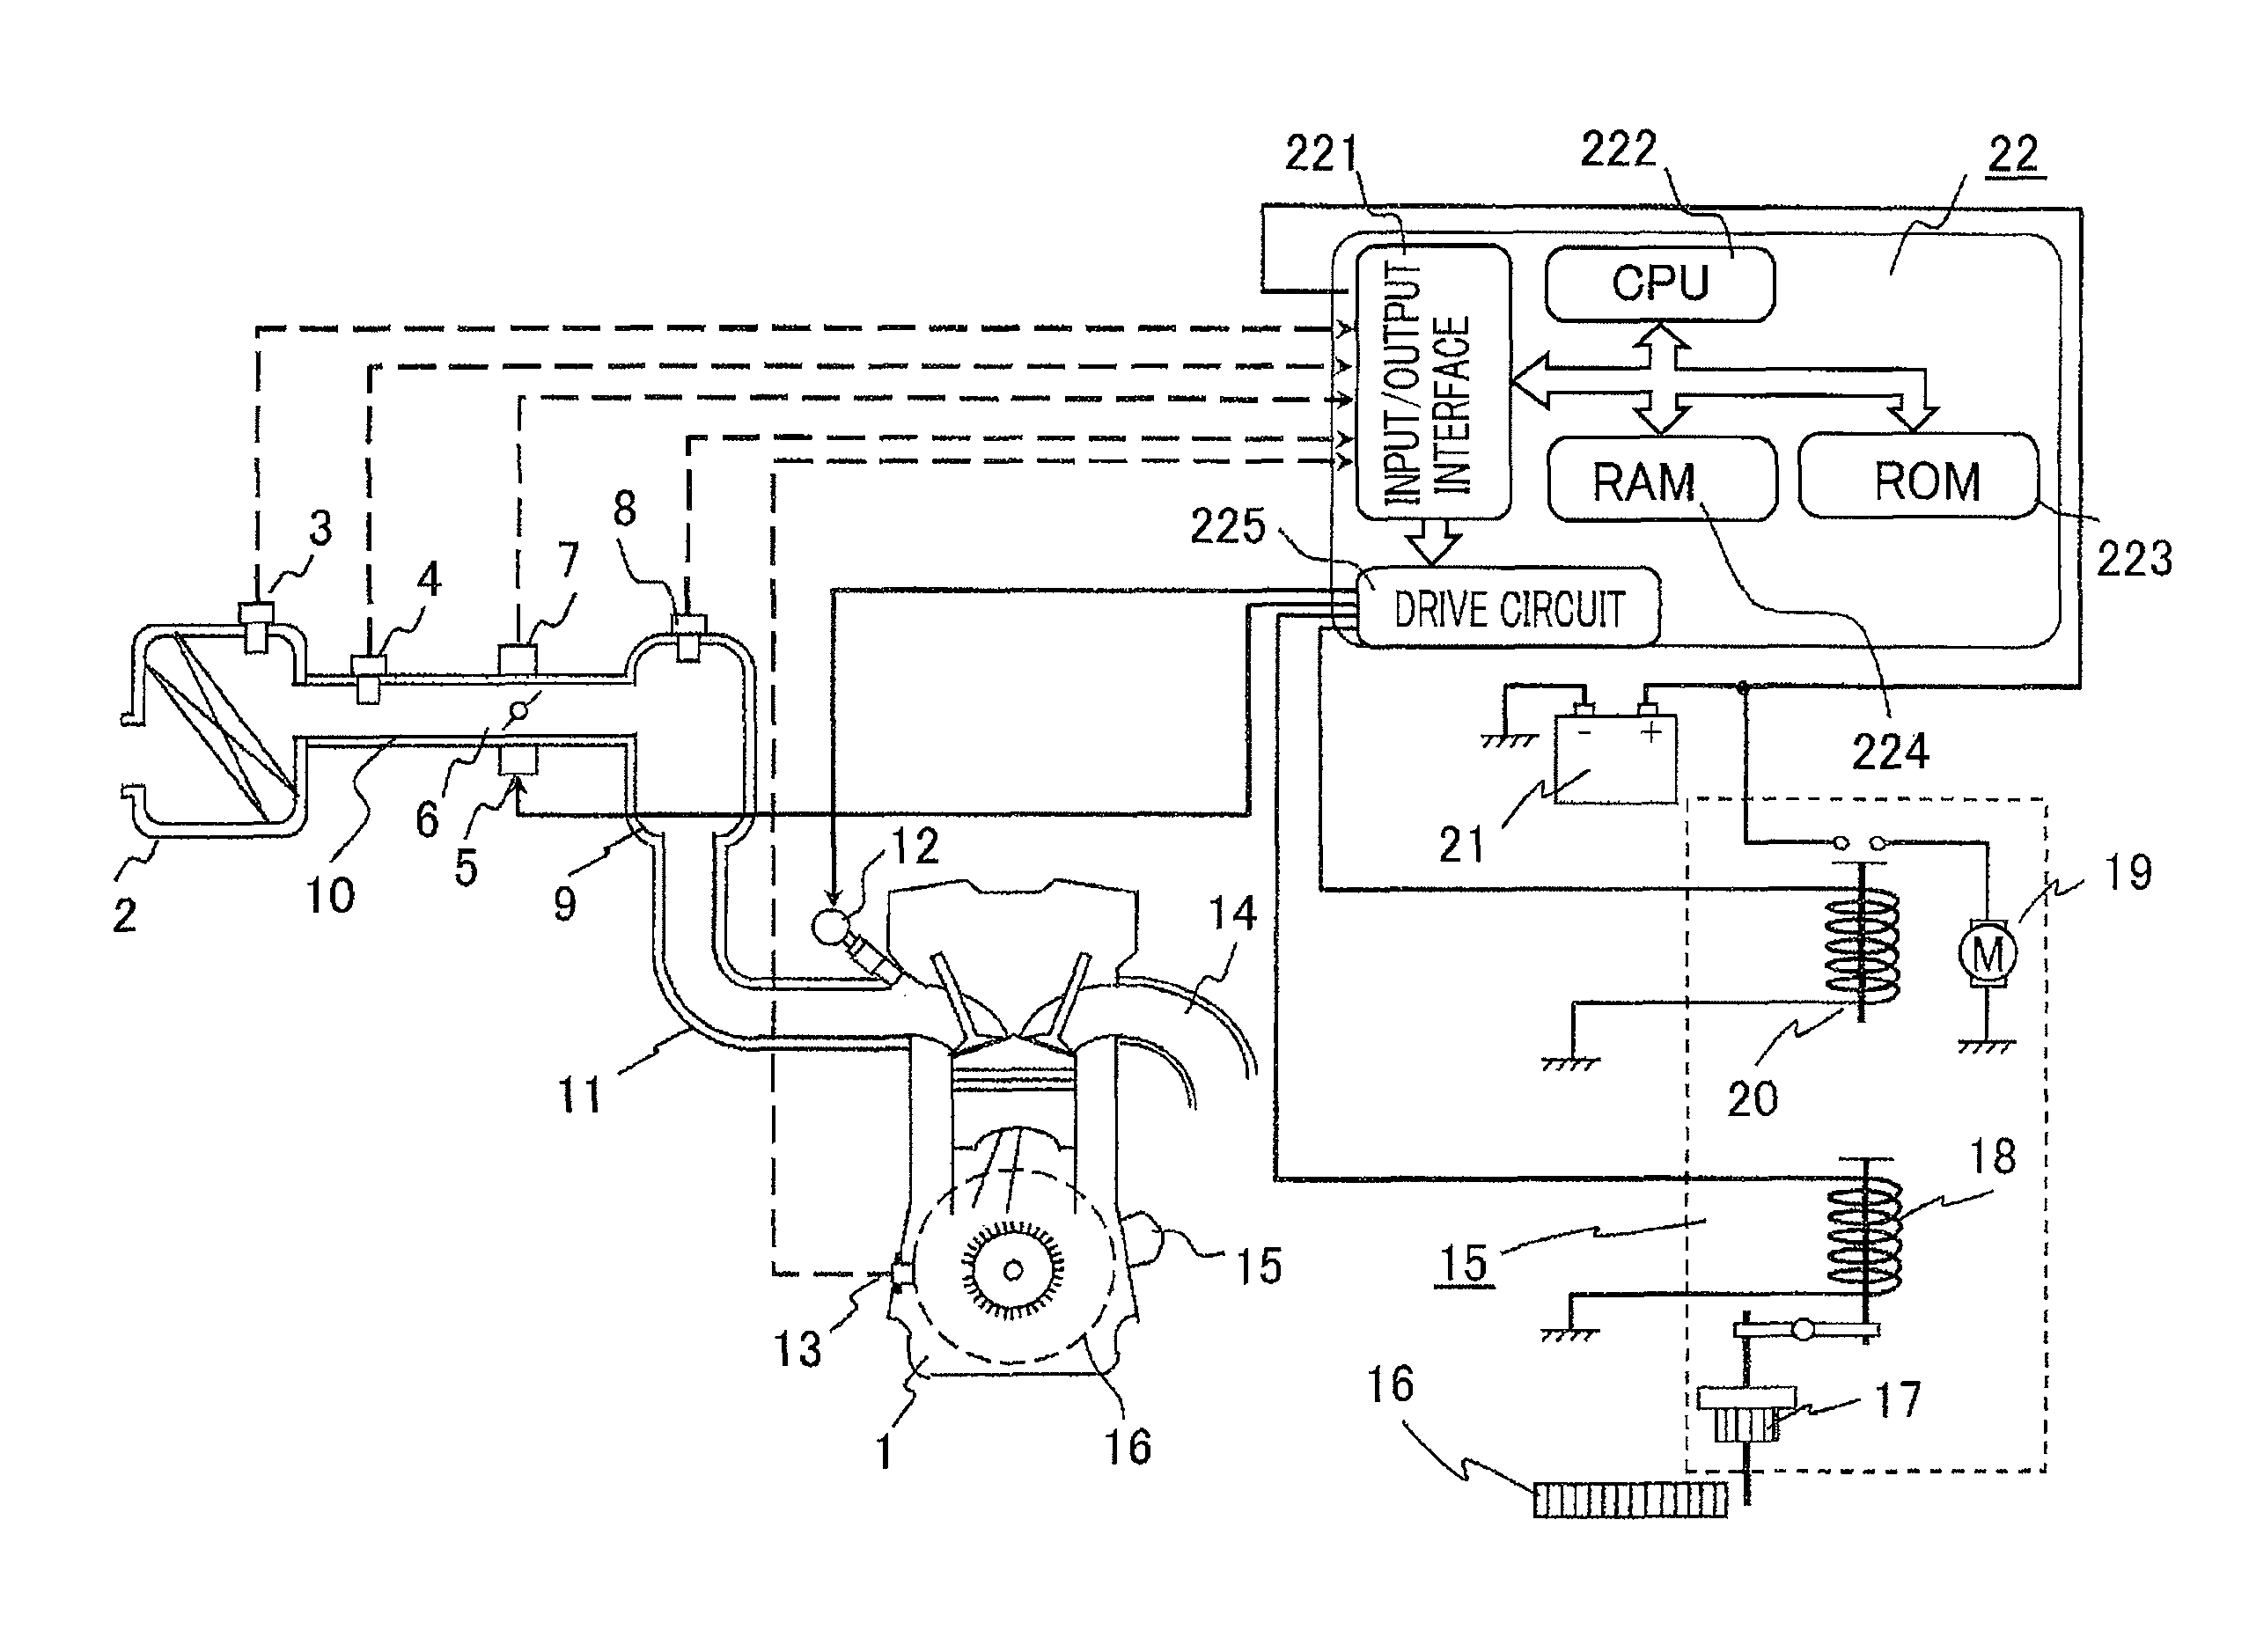 Internal-combustion-engine automatic stop and restart system